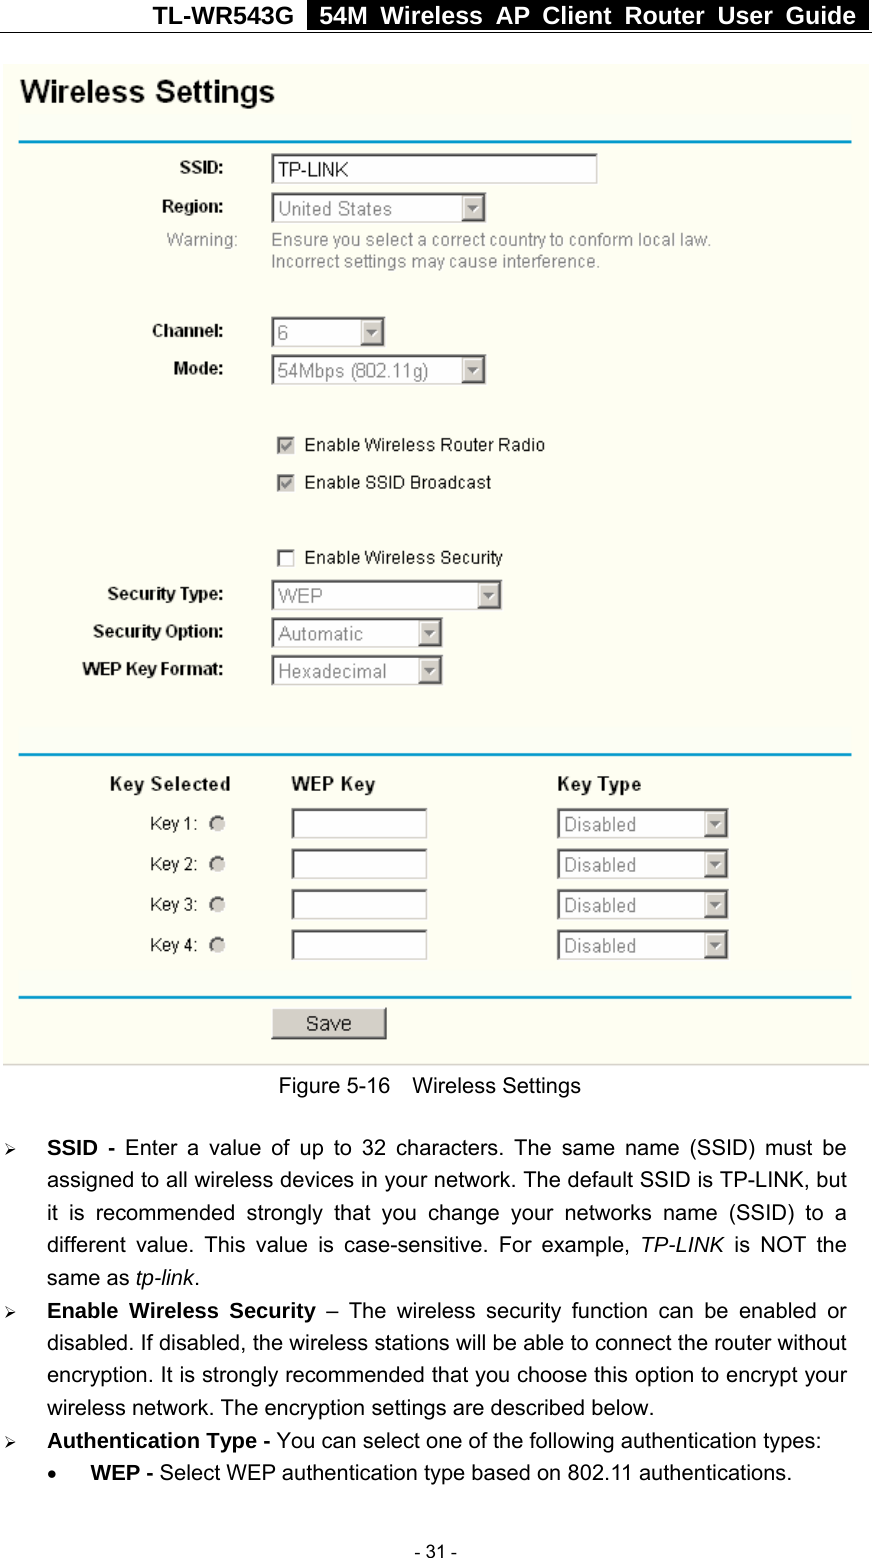 TL-WR543G   54M Wireless AP Client Router User Guide   Figure 5-16  Wireless Settings ¾ SSID - Enter a value of up to 32 characters. The same name (SSID) must be assigned to all wireless devices in your network. The default SSID is TP-LINK, but it is recommended strongly that you change your networks name (SSID) to a different value. This value is case-sensitive. For example, TP-LINK is NOT the same as tp-link. ¾ Enable Wireless Security – The wireless security function can be enabled or disabled. If disabled, the wireless stations will be able to connect the router without encryption. It is strongly recommended that you choose this option to encrypt your wireless network. The encryption settings are described below. ¾ Authentication Type - You can select one of the following authentication types: • WEP - Select WEP authentication type based on 802.11 authentications.  - 31 - 